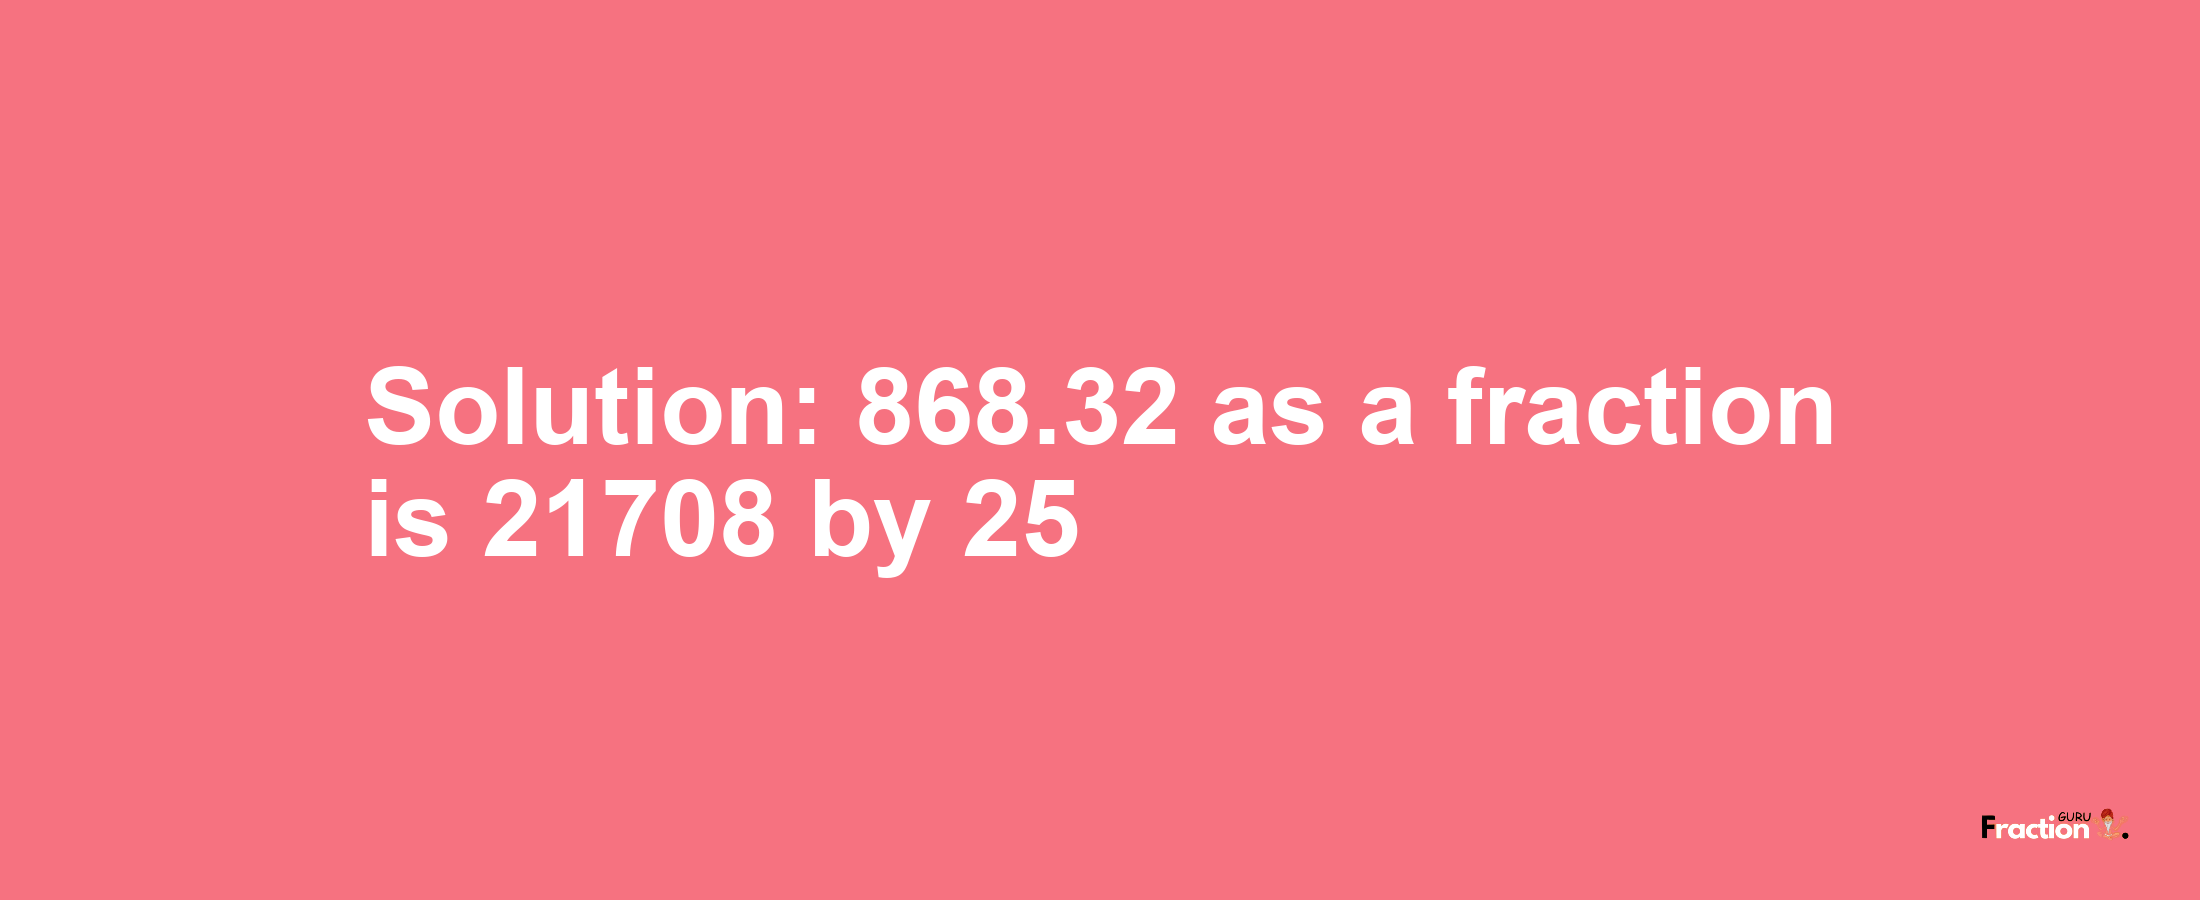 Solution:868.32 as a fraction is 21708/25